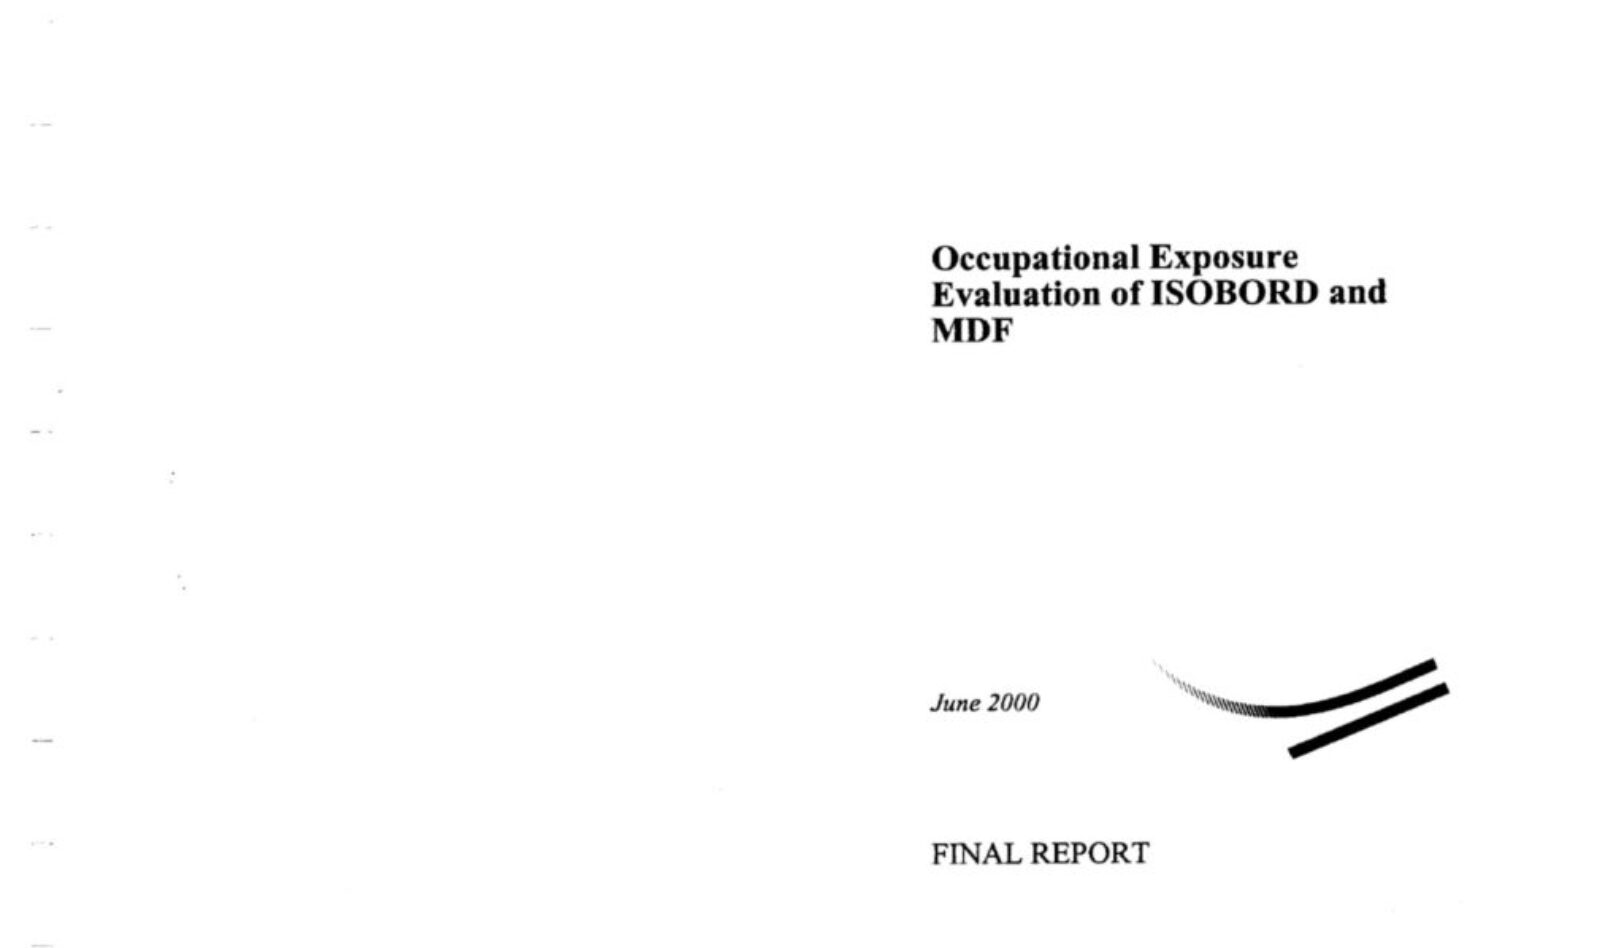 Evaluation of ISOBORD and MDF – Occupational Exposure Report